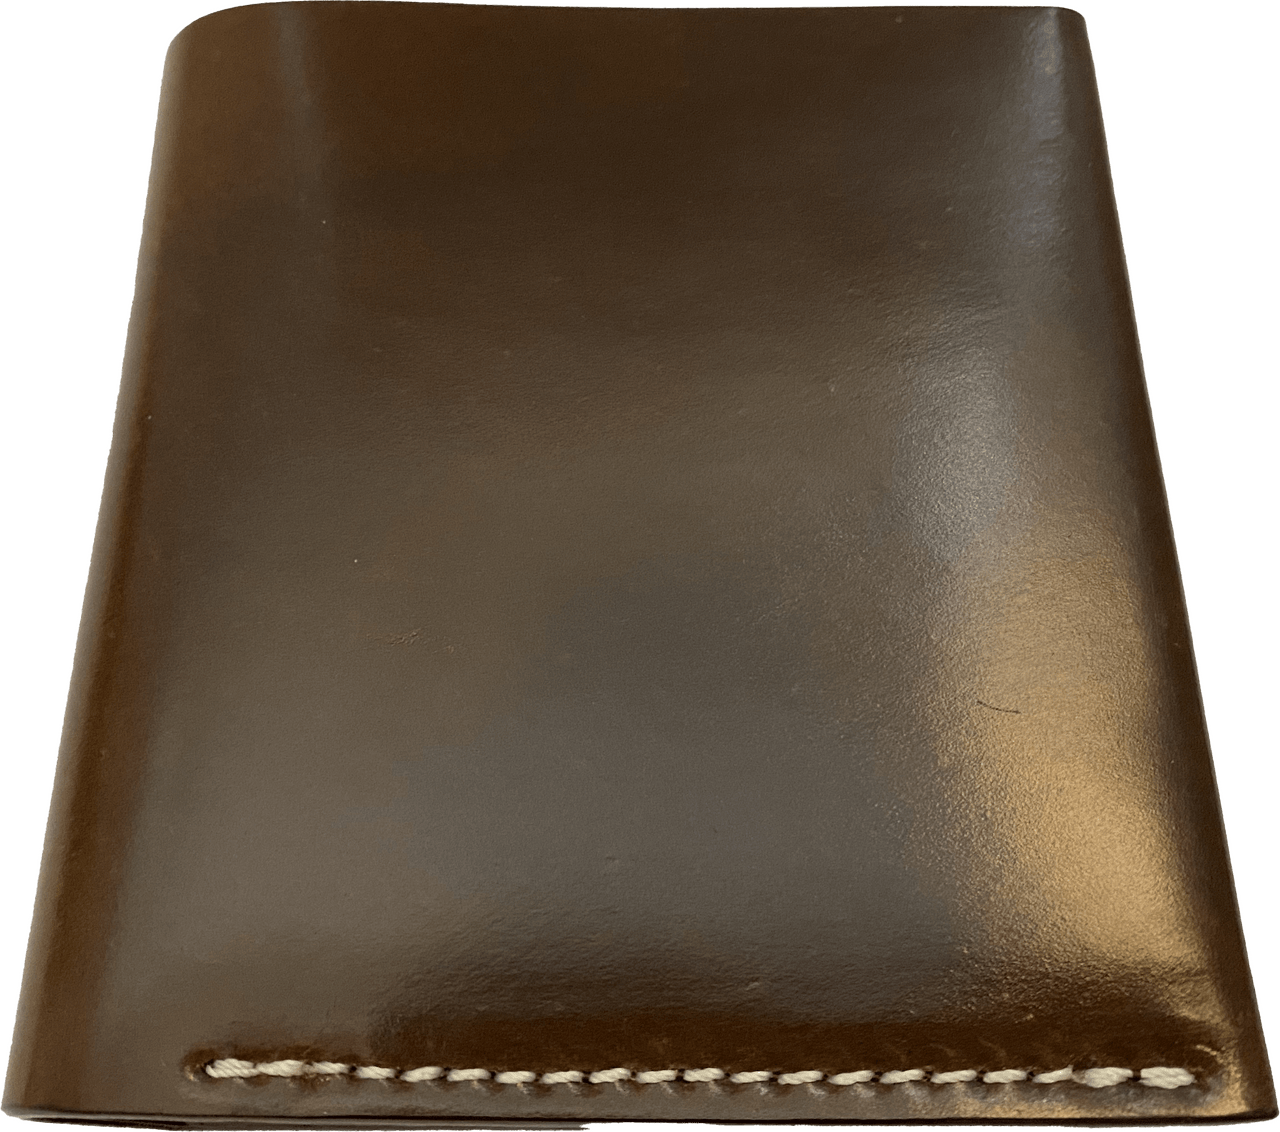 Horween Shell Cordovan Vegetable Tanned Leather Bifold Wallet 